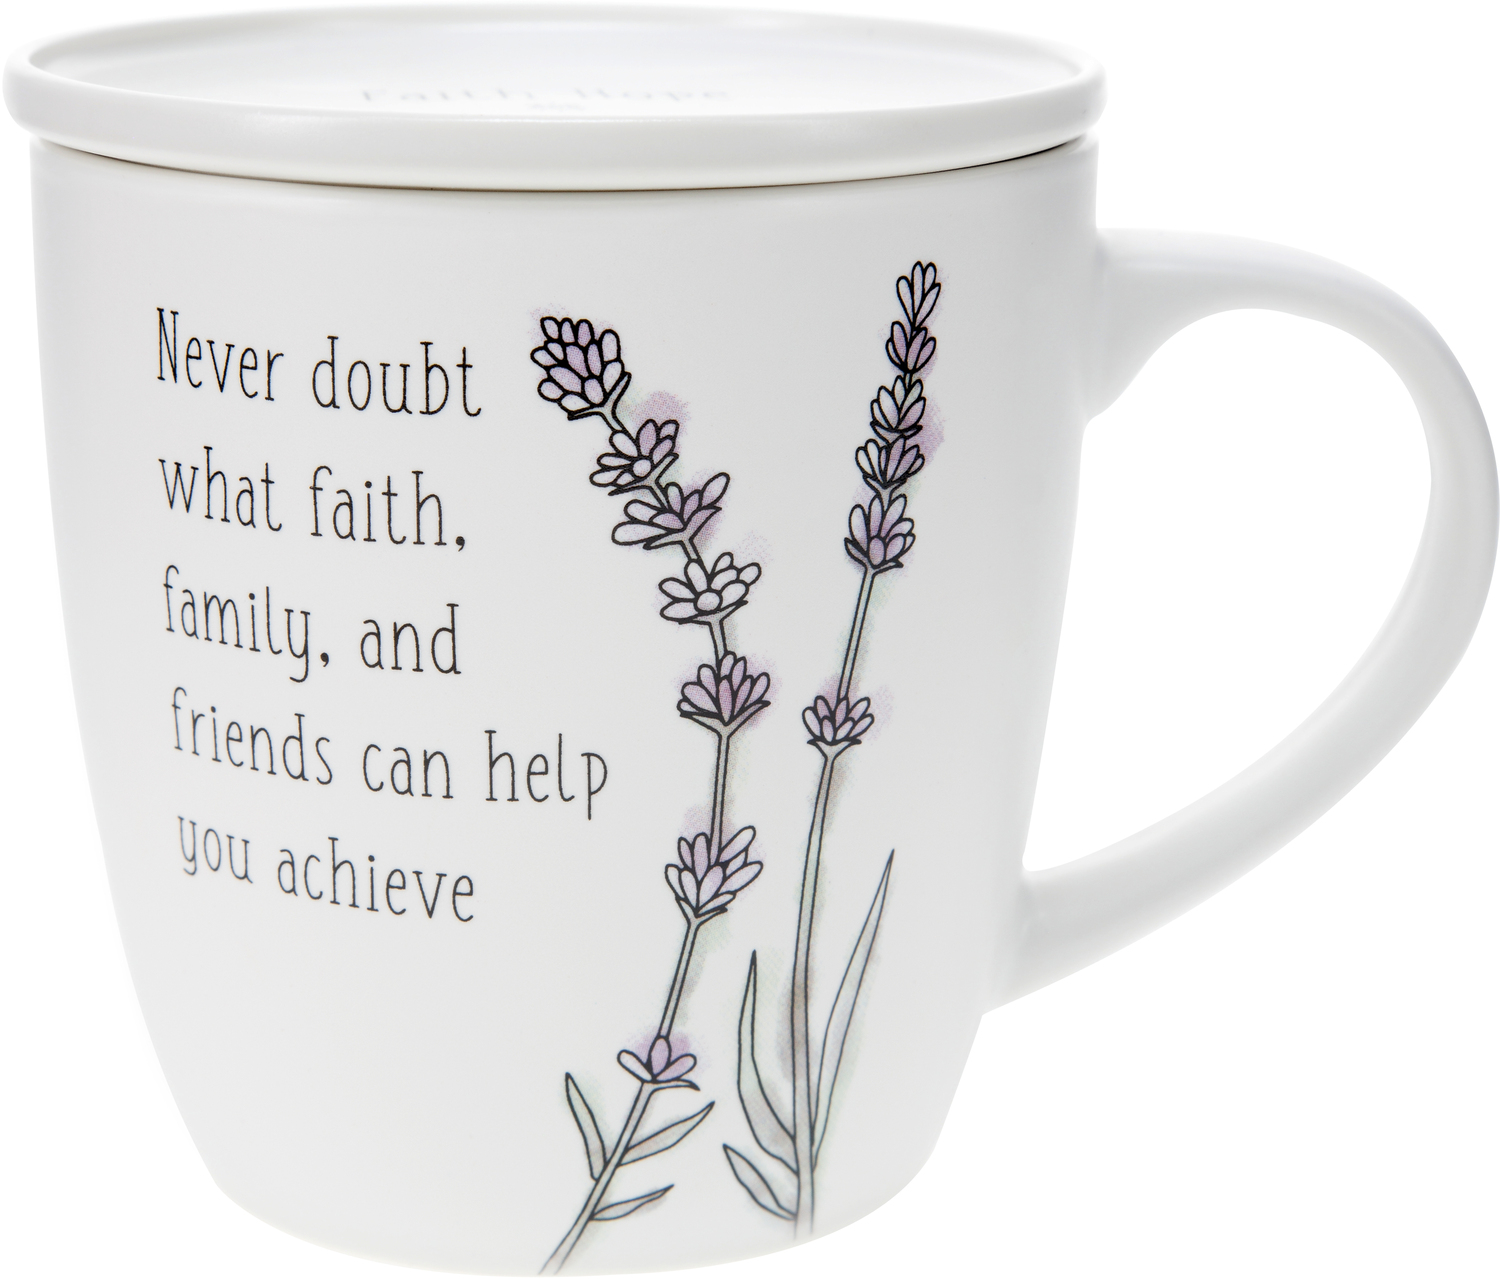 Never Doubt by Faith Hope and Healing - Never Doubt - 17 oz Cup with Coaster Lid